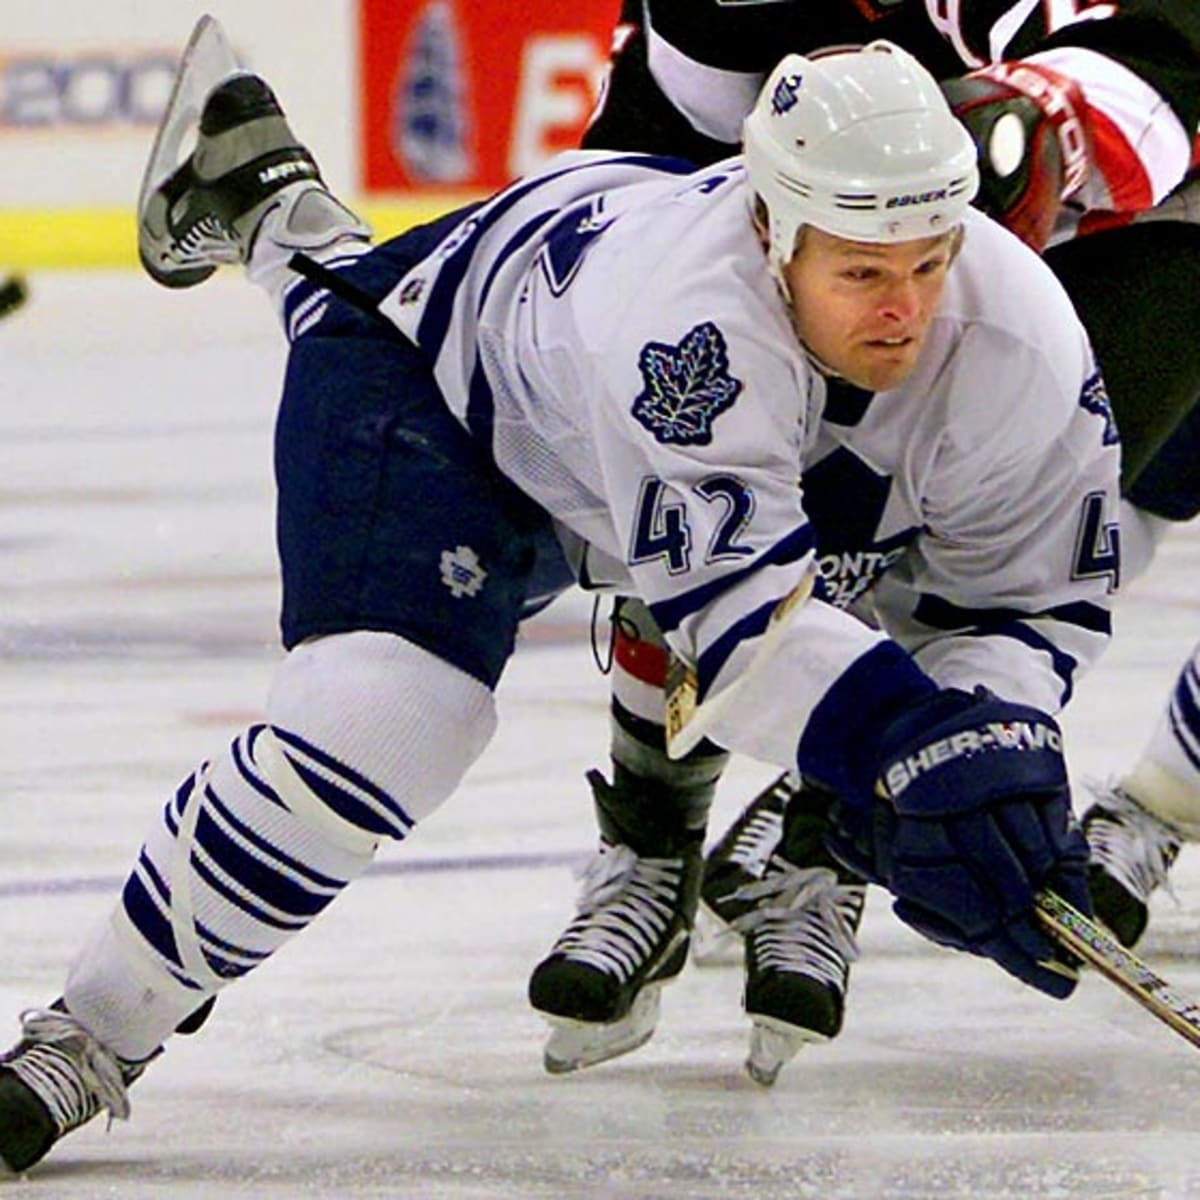 The Best Ever Toronto Maple Leafs Players by Jersey Number - Page 3